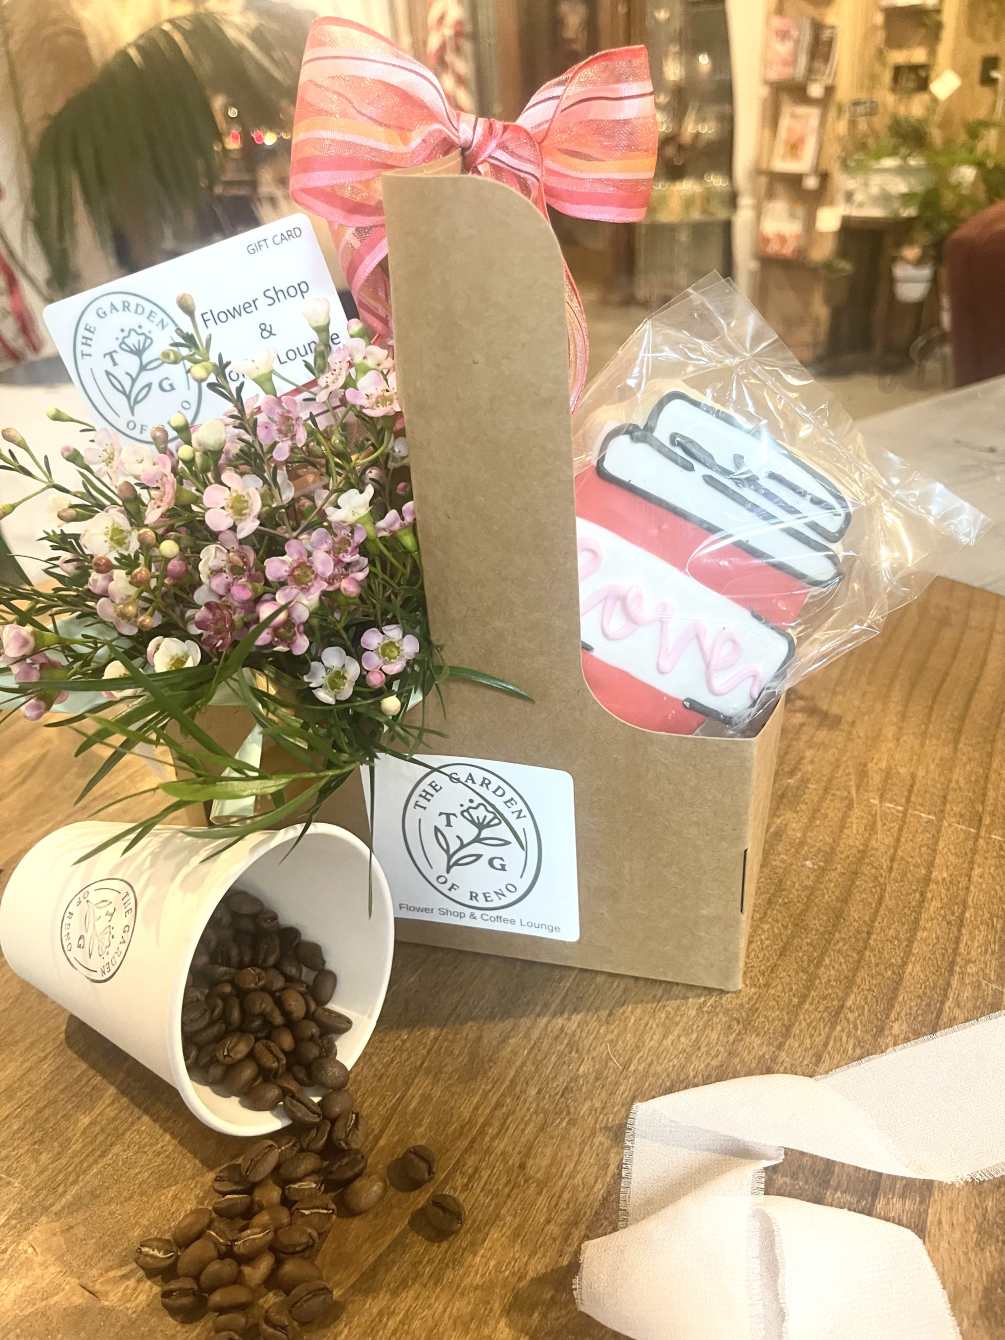 This is such a unique gift for all coffee and flower lovers!